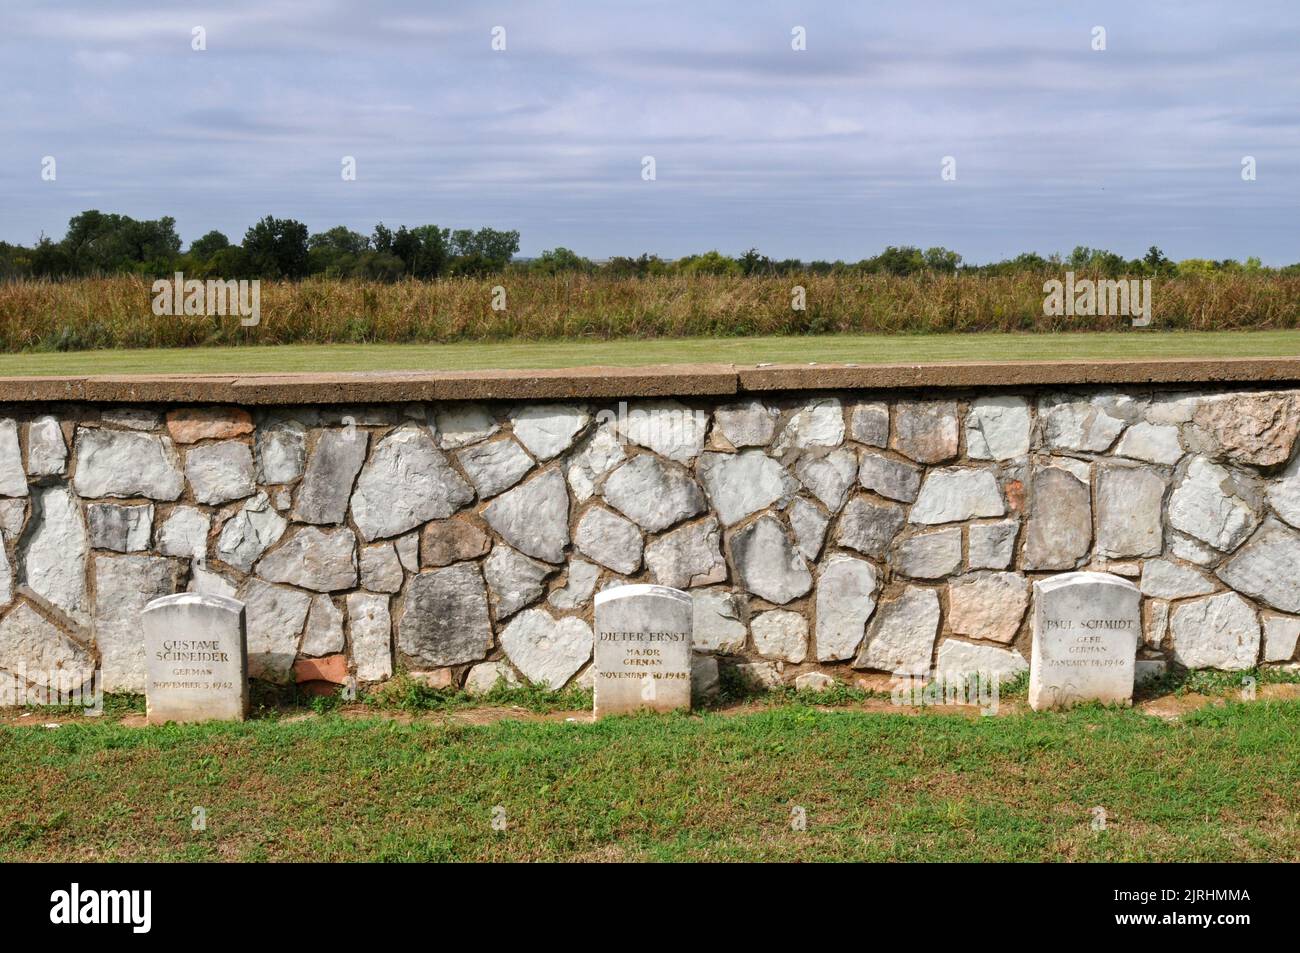 Graves of German soldiers taken prisoner during the Second World War line a stone wall in the historic cemetery at Fort Reno in Oklahoma. Stock Photo